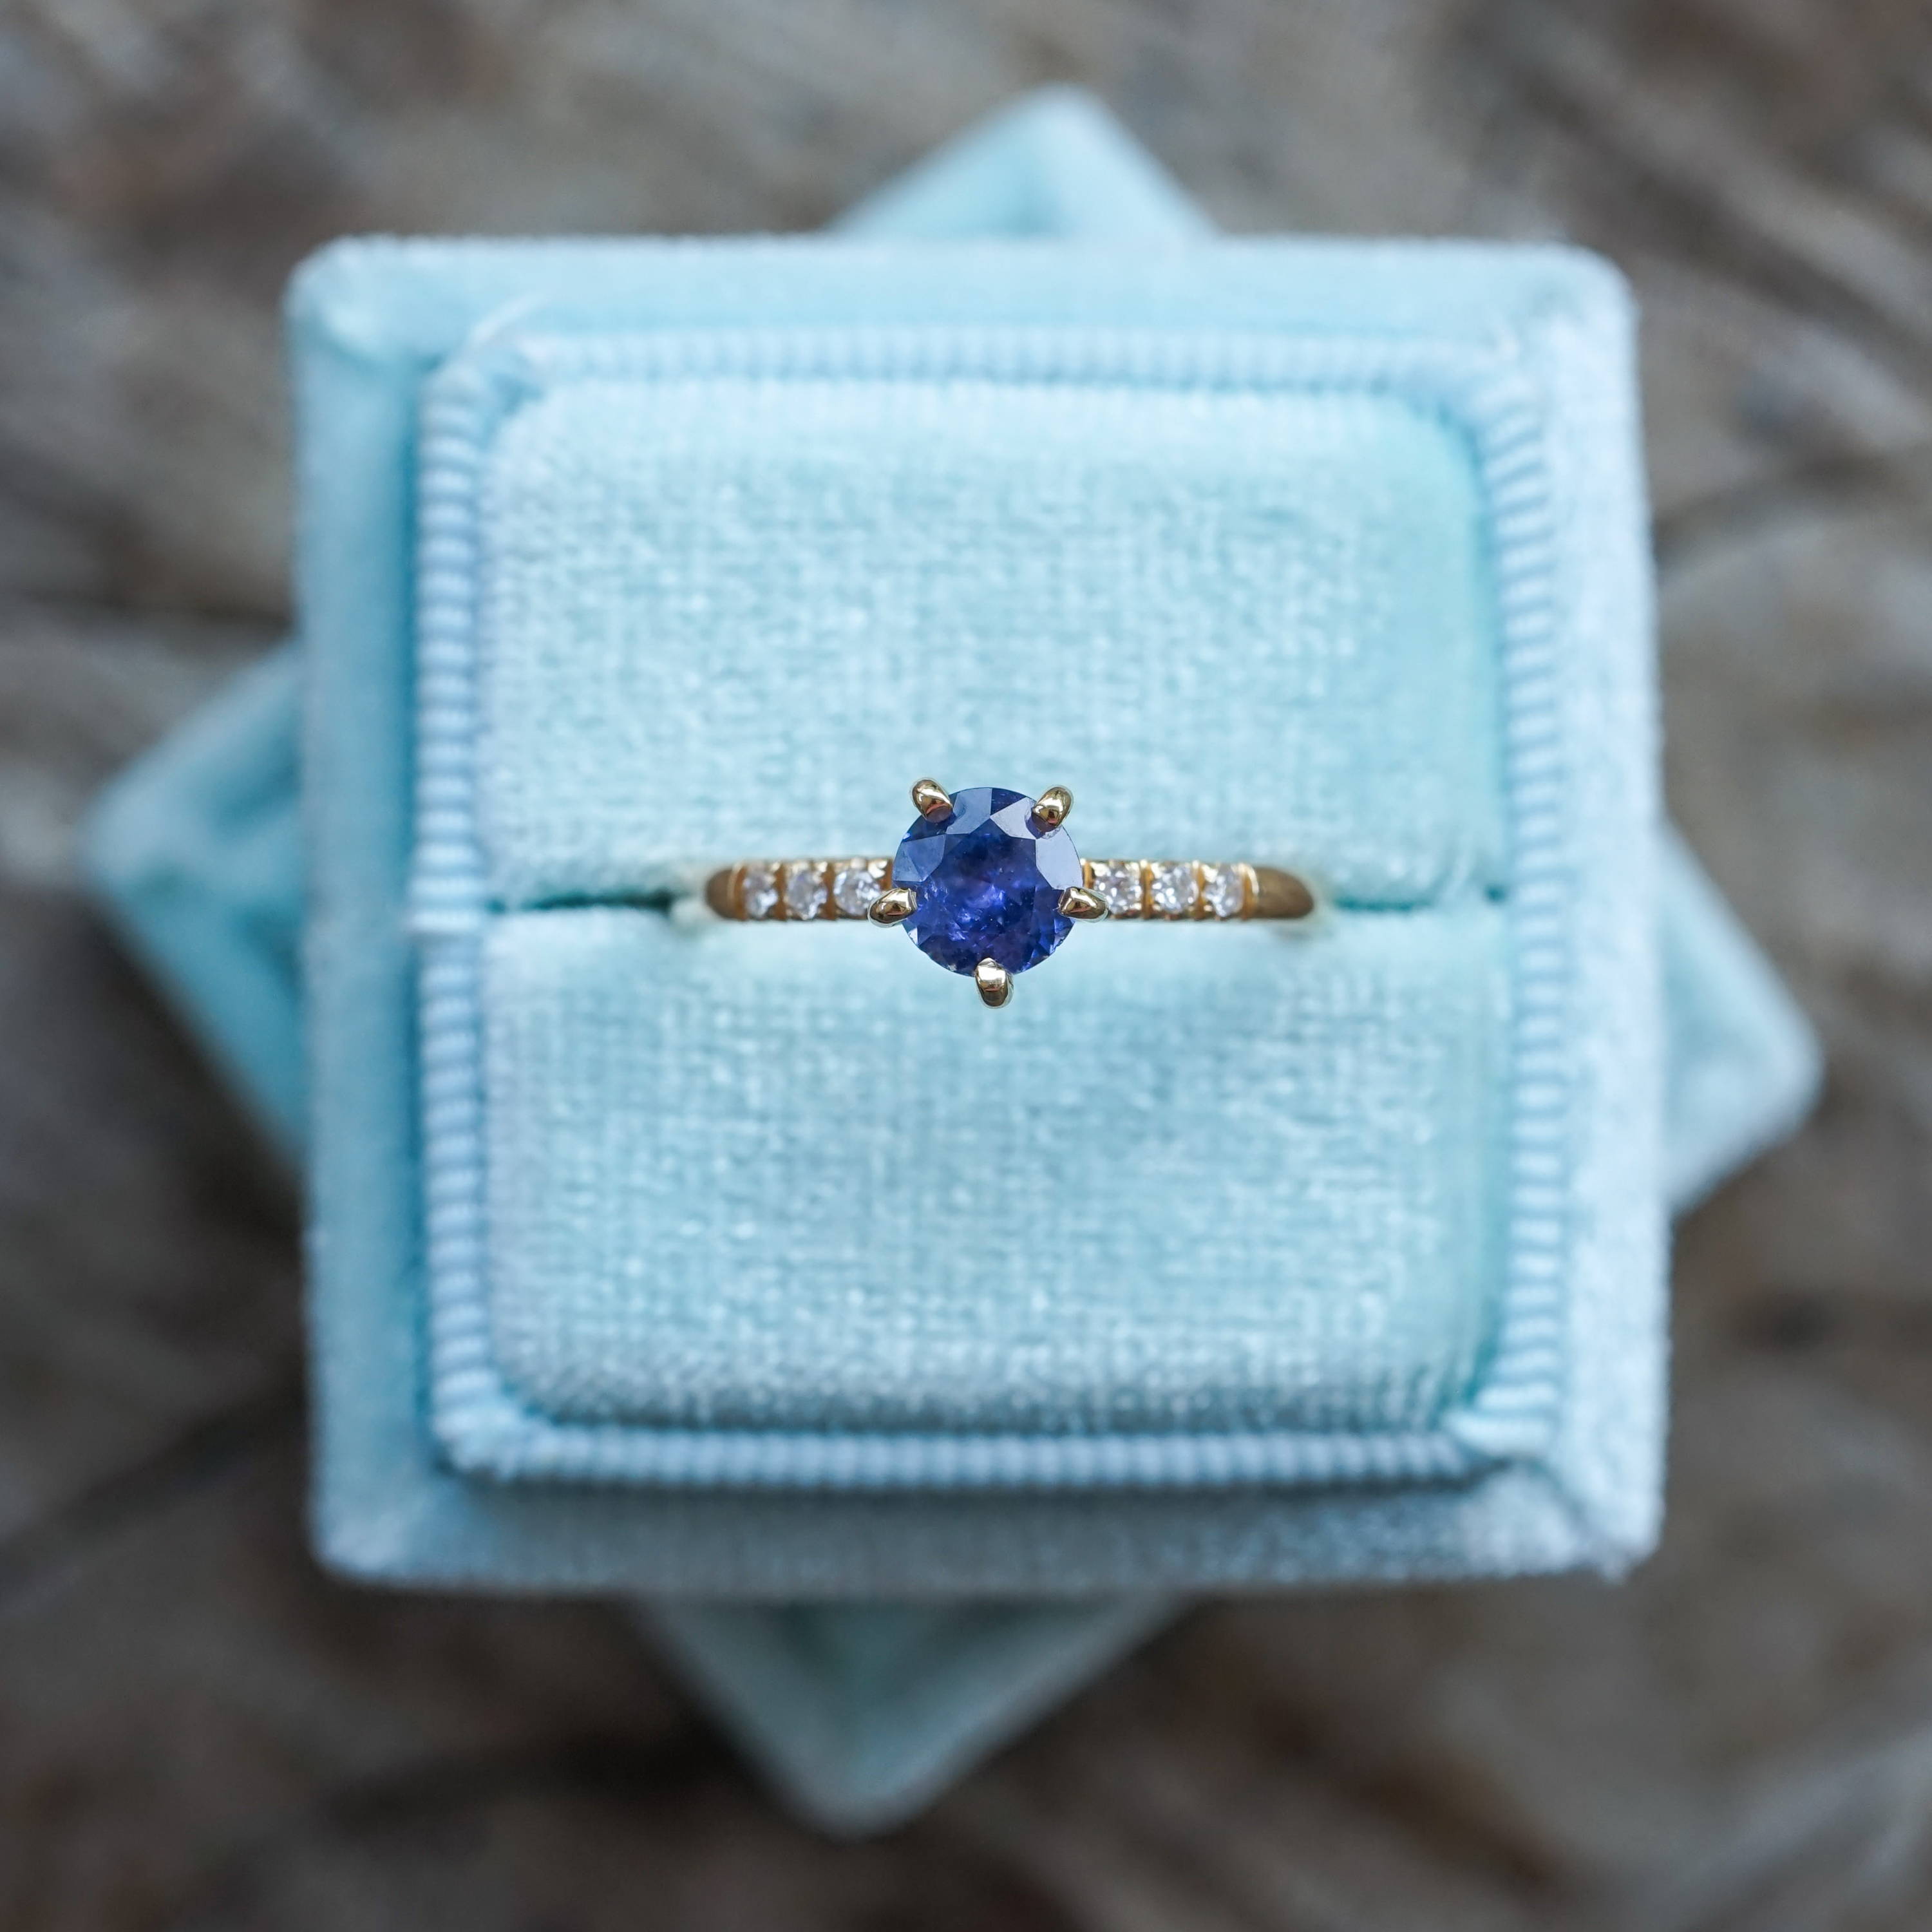 A stunning sapphire set in an ethical gold band accompanied by conflict free diamonds.